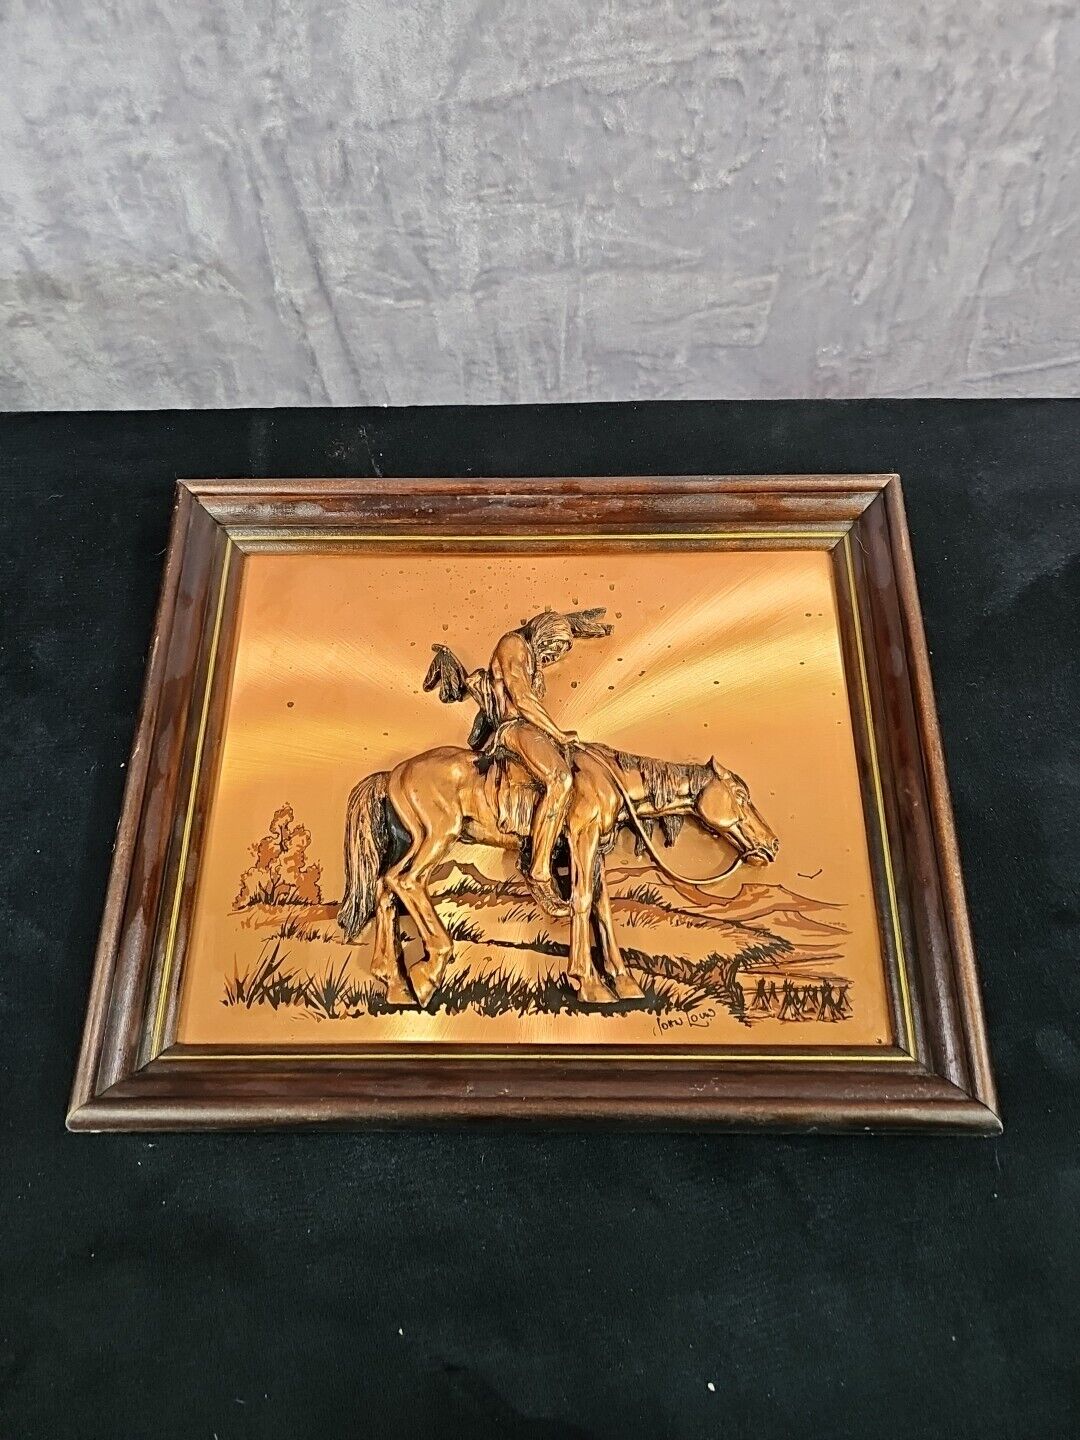 John Louw 3D Copper Picture “End of the Trail” Indian Framed Wall Art